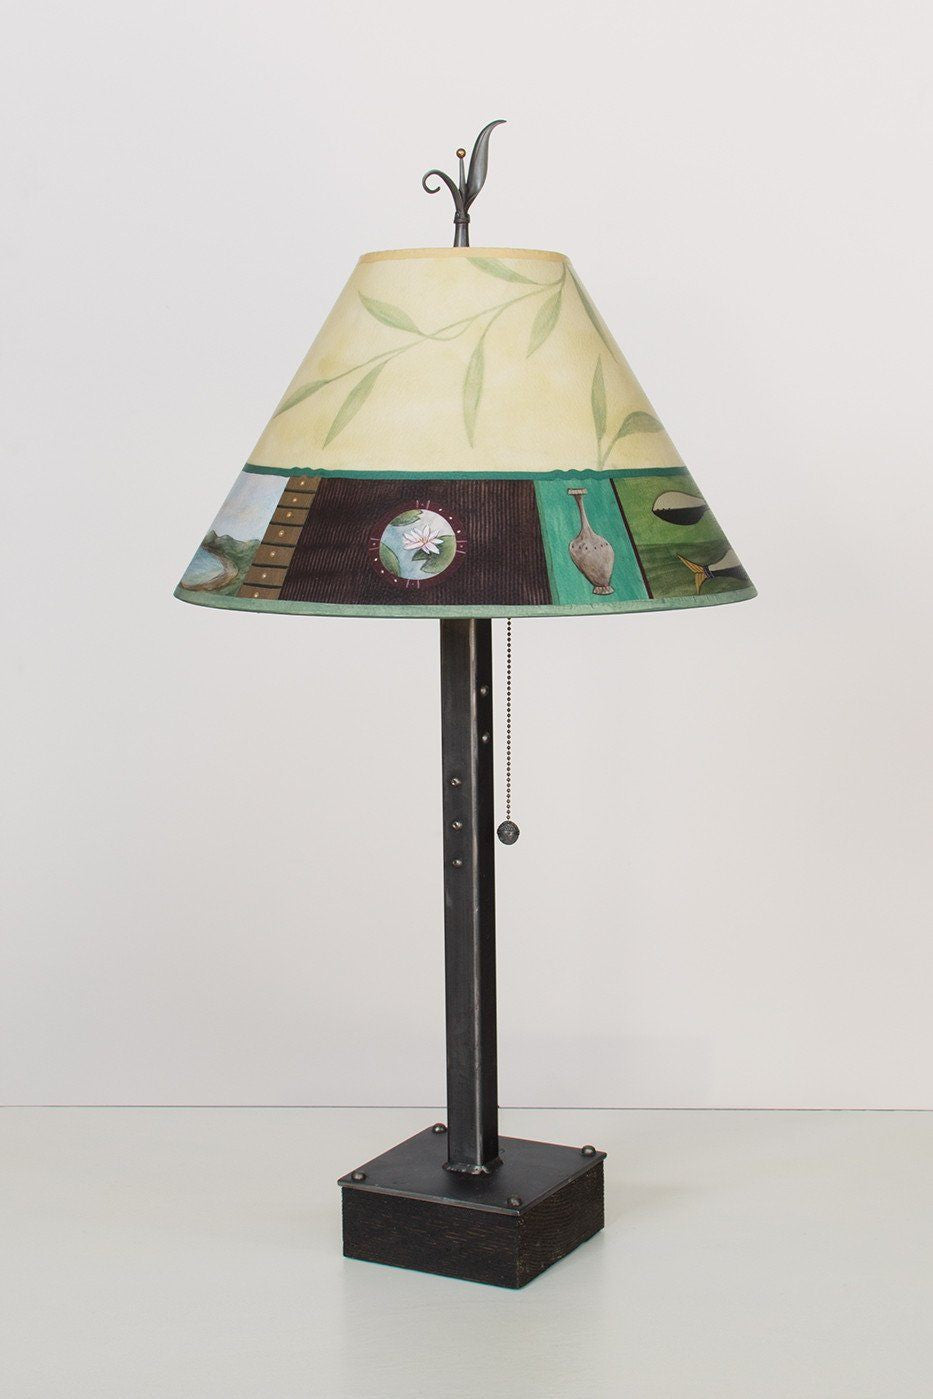 Steel Table Lamp on Wood with Medium Conical Shade in Twin Fish